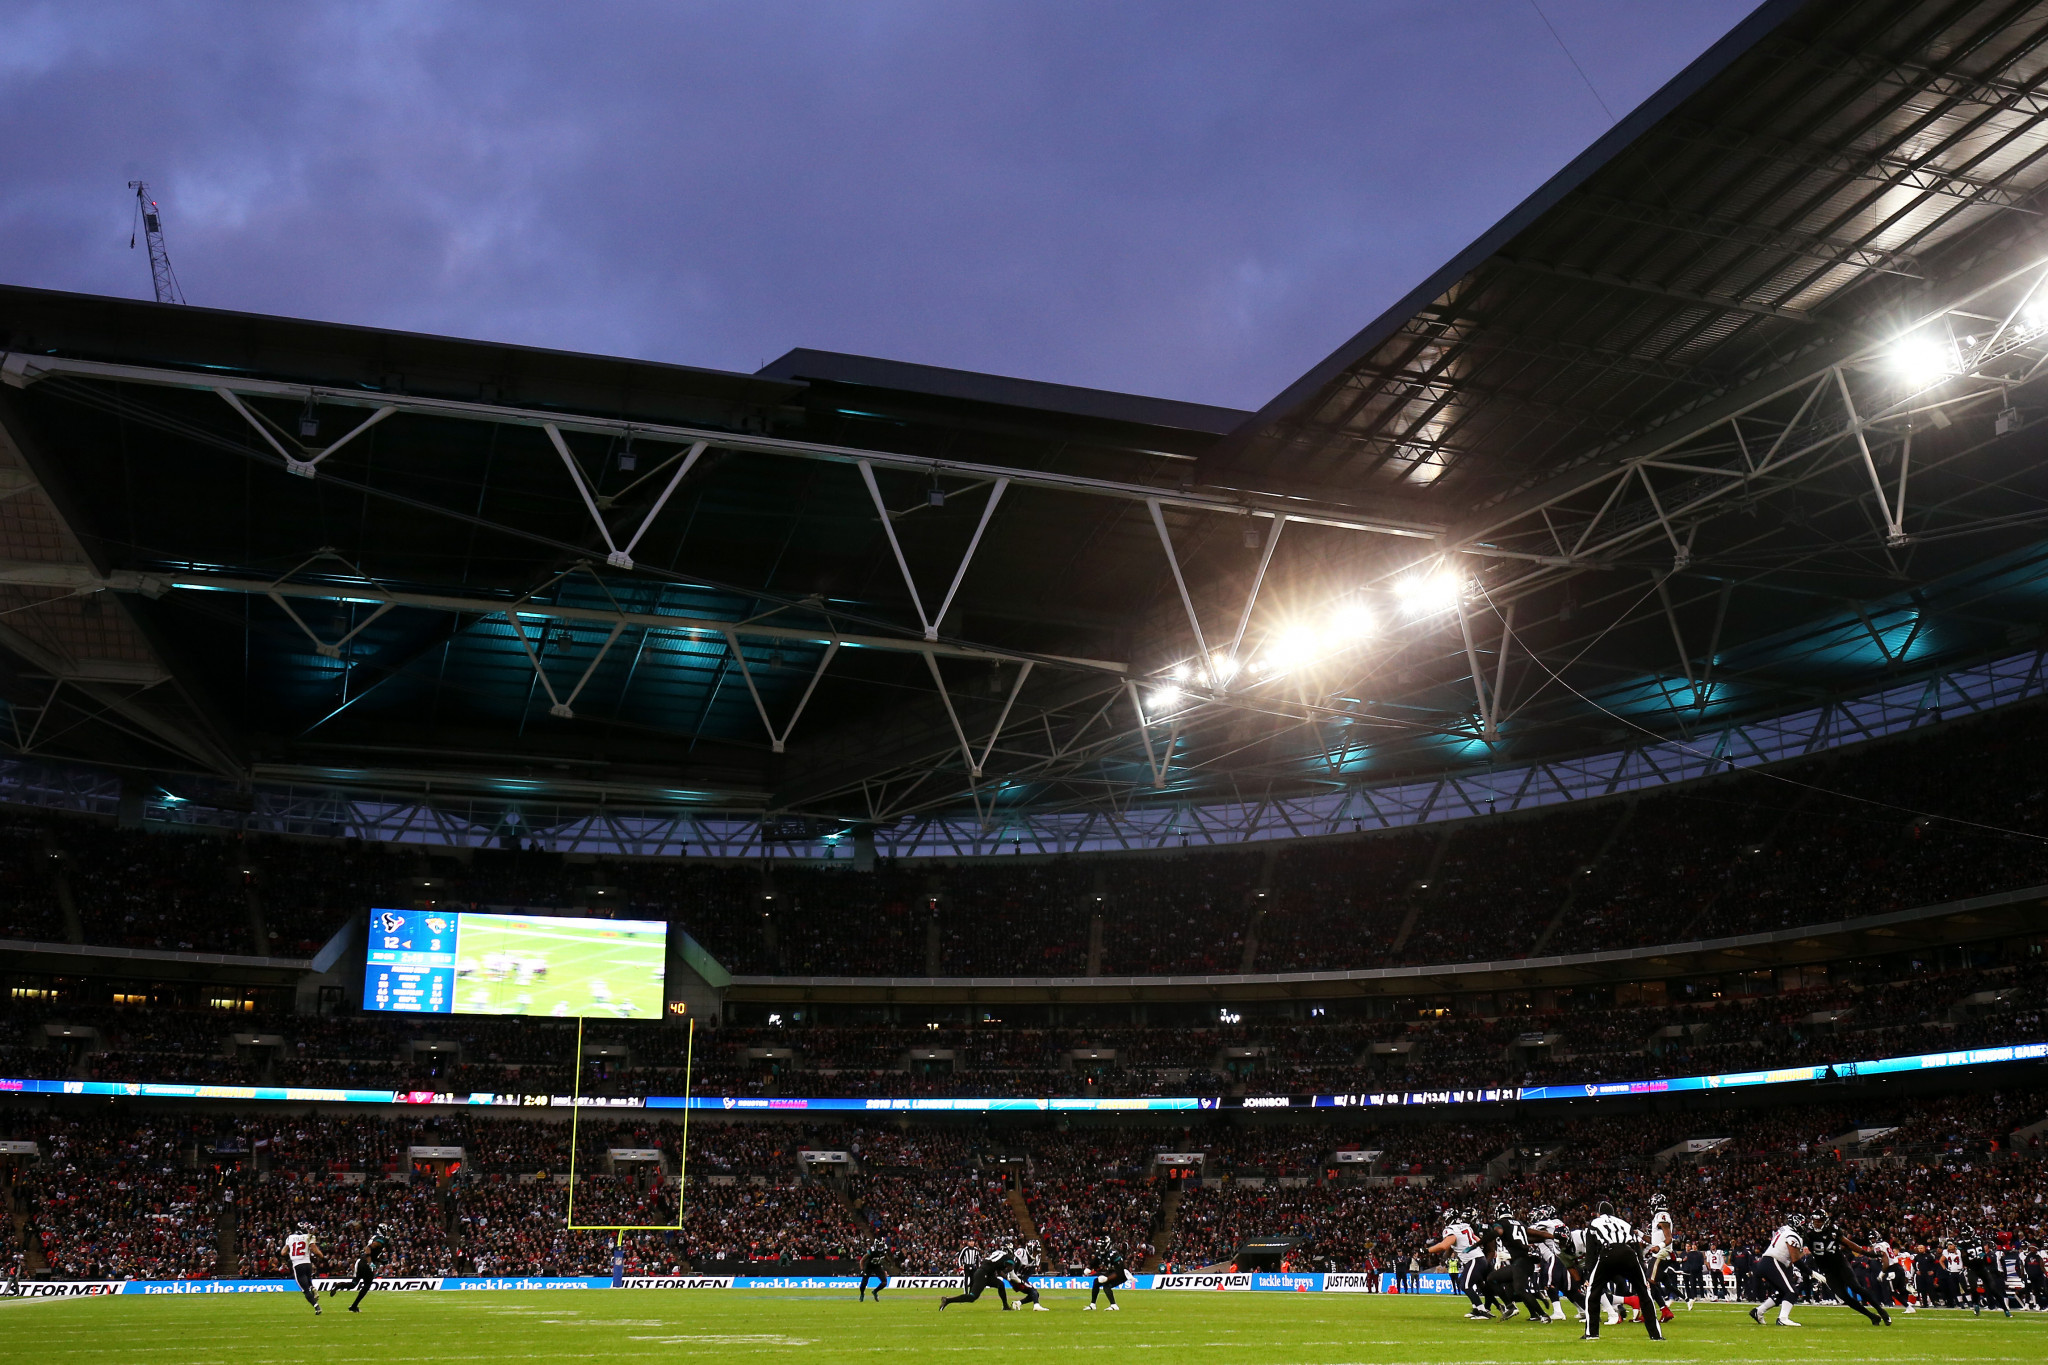 The FA has lost revenue from events such as NFL matches at Wembley ©Getty Images